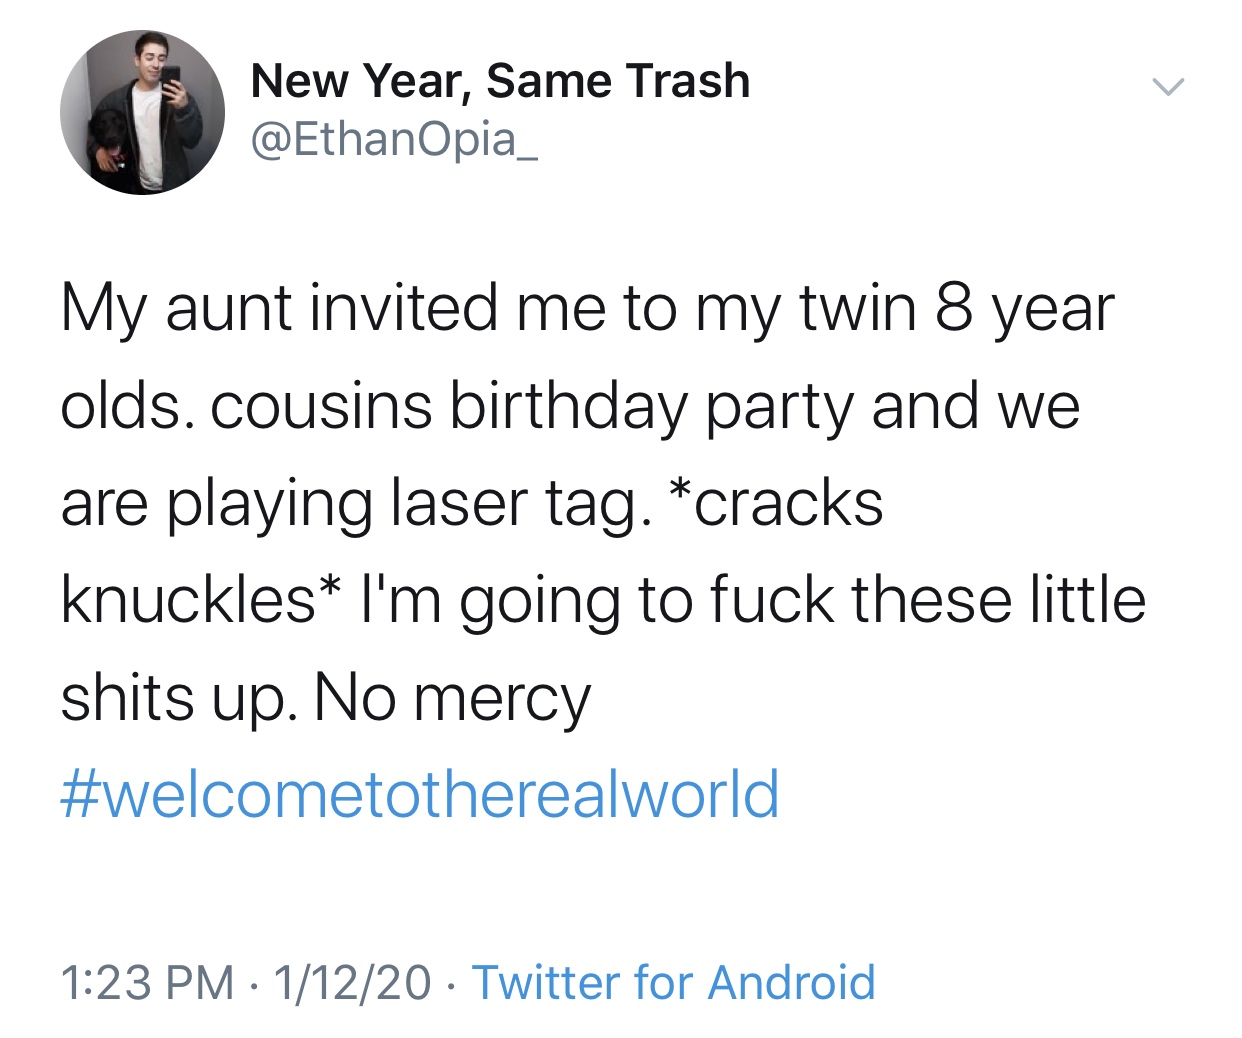 woman's fed up - New Year, Same Trash My aunt invited me to my twin 8 year olds. cousins birthday party and we are playing laser tag. cracks knuckles I'm going to fuck these little shits up. No mercy 11220 Twitter for Android